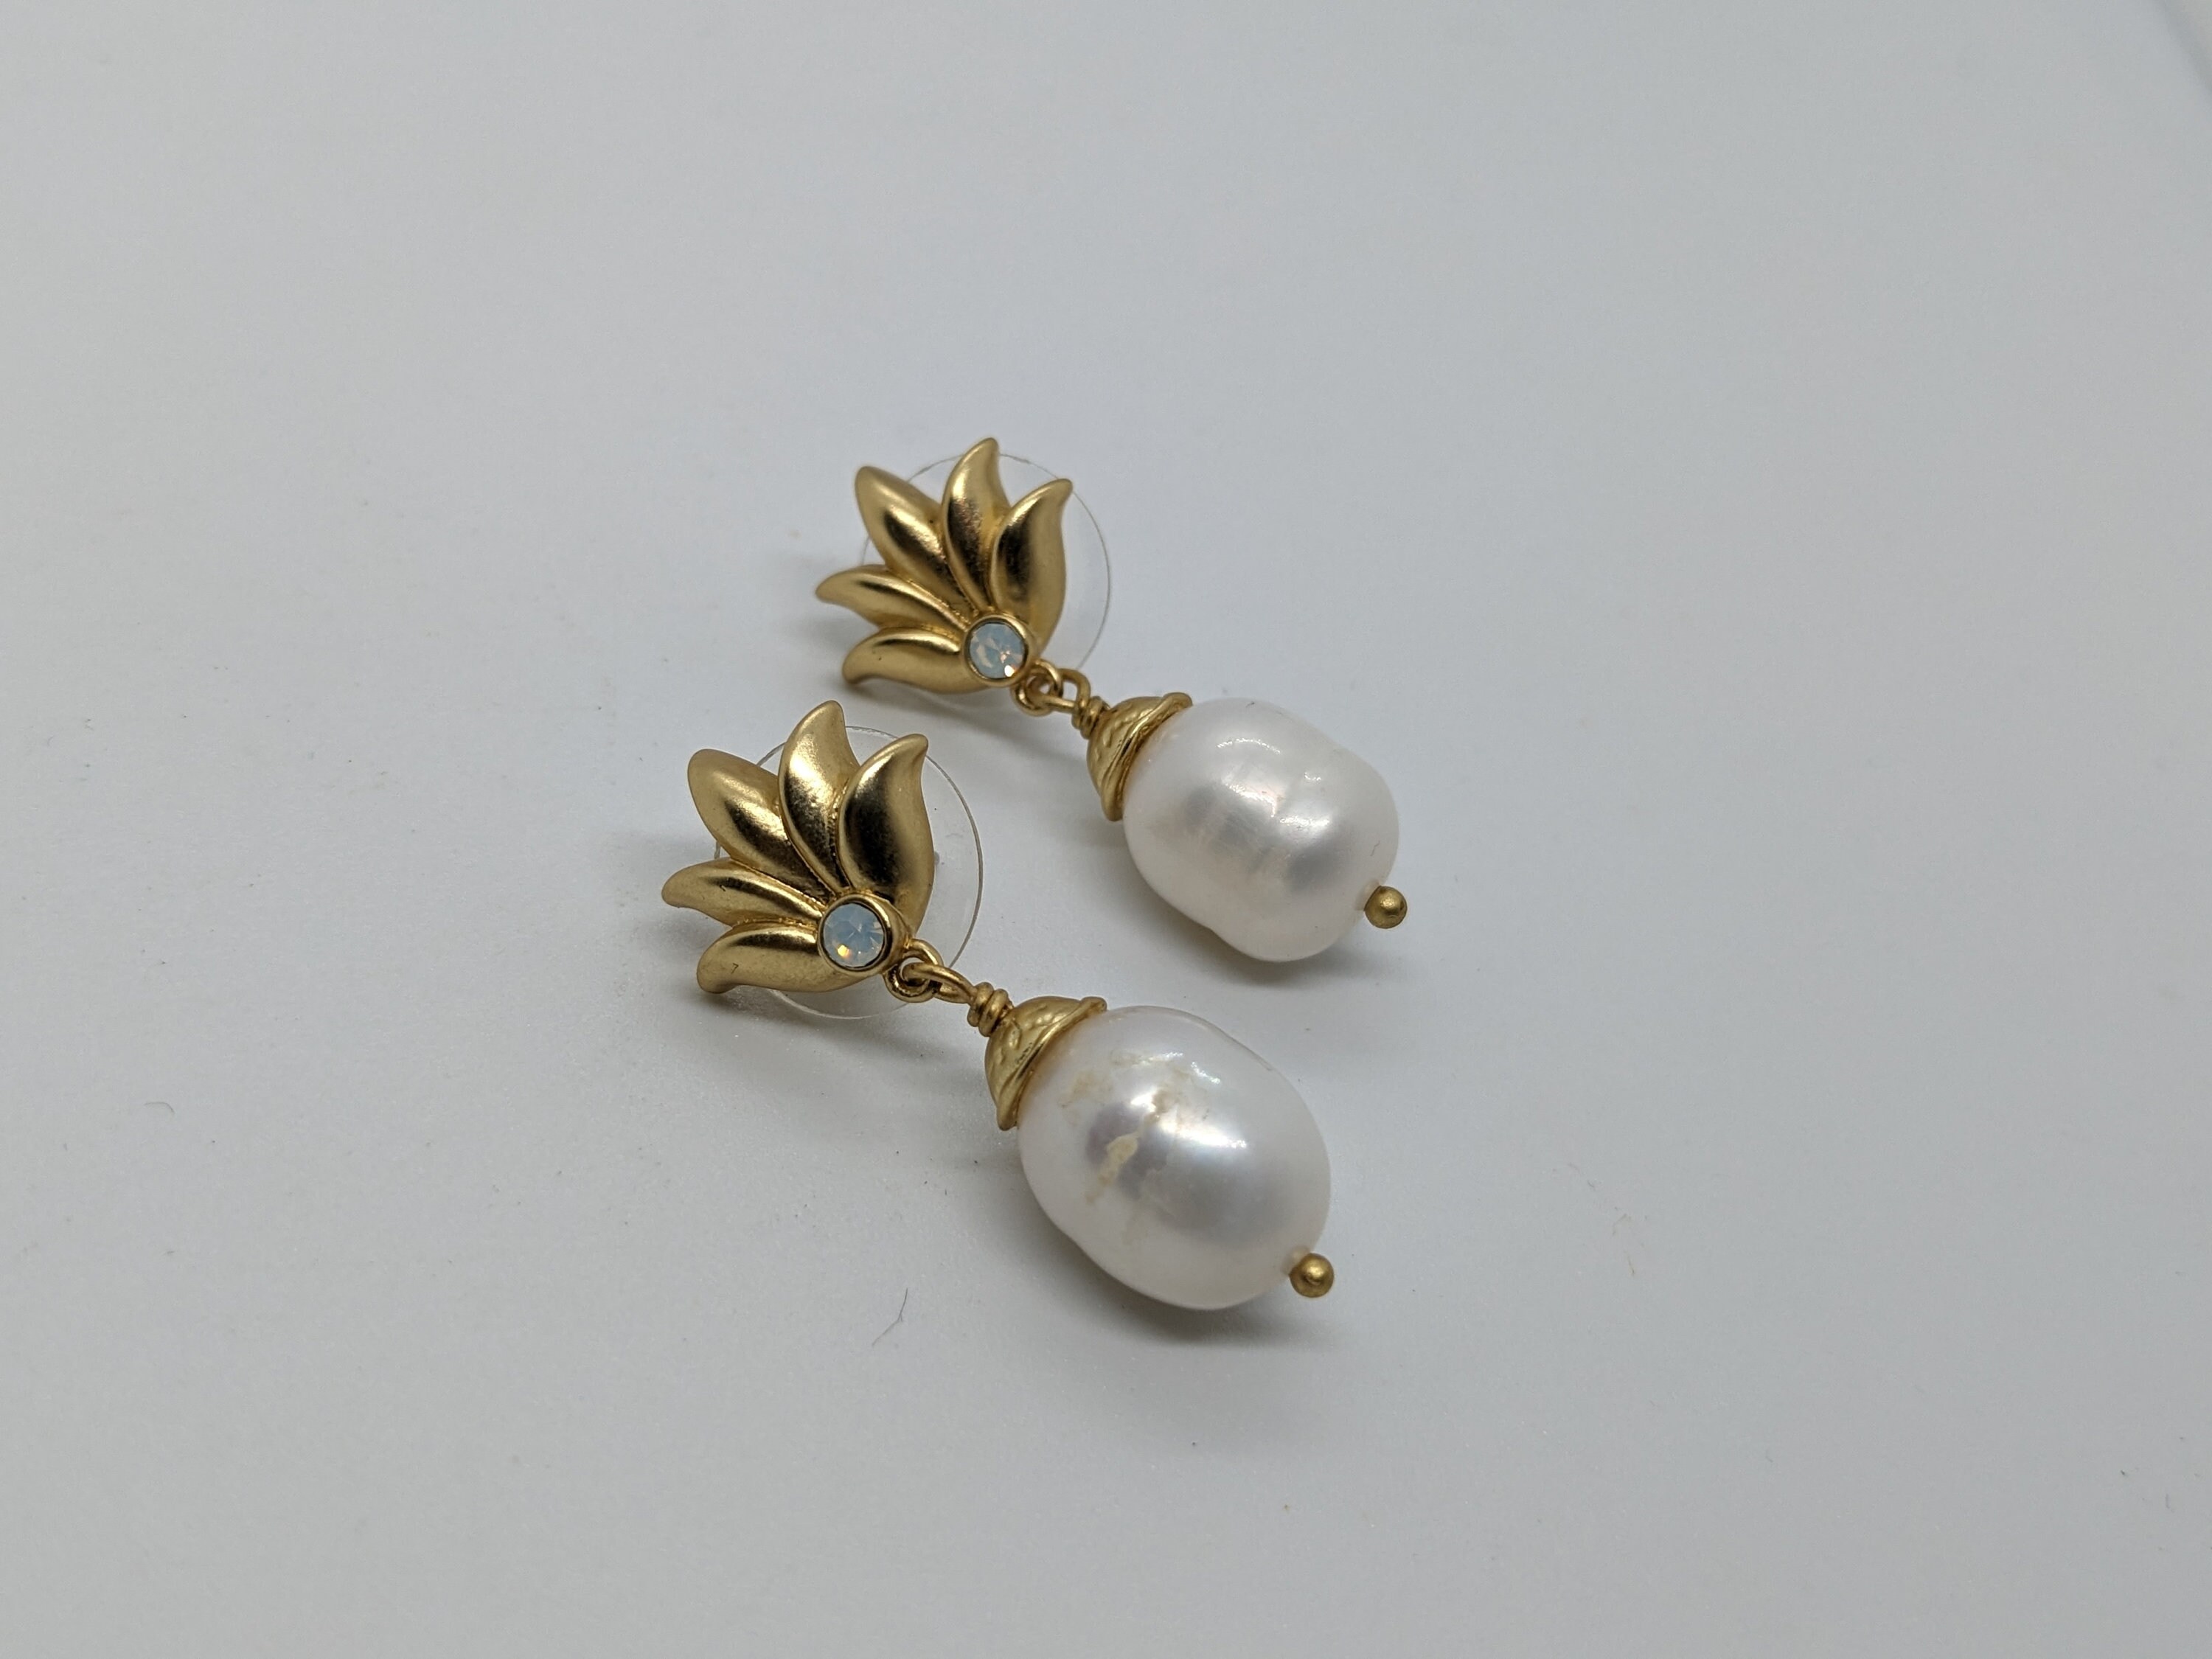 Floral Pearl Trim Golden Earrings - Retro, Indie and Unique Fashion